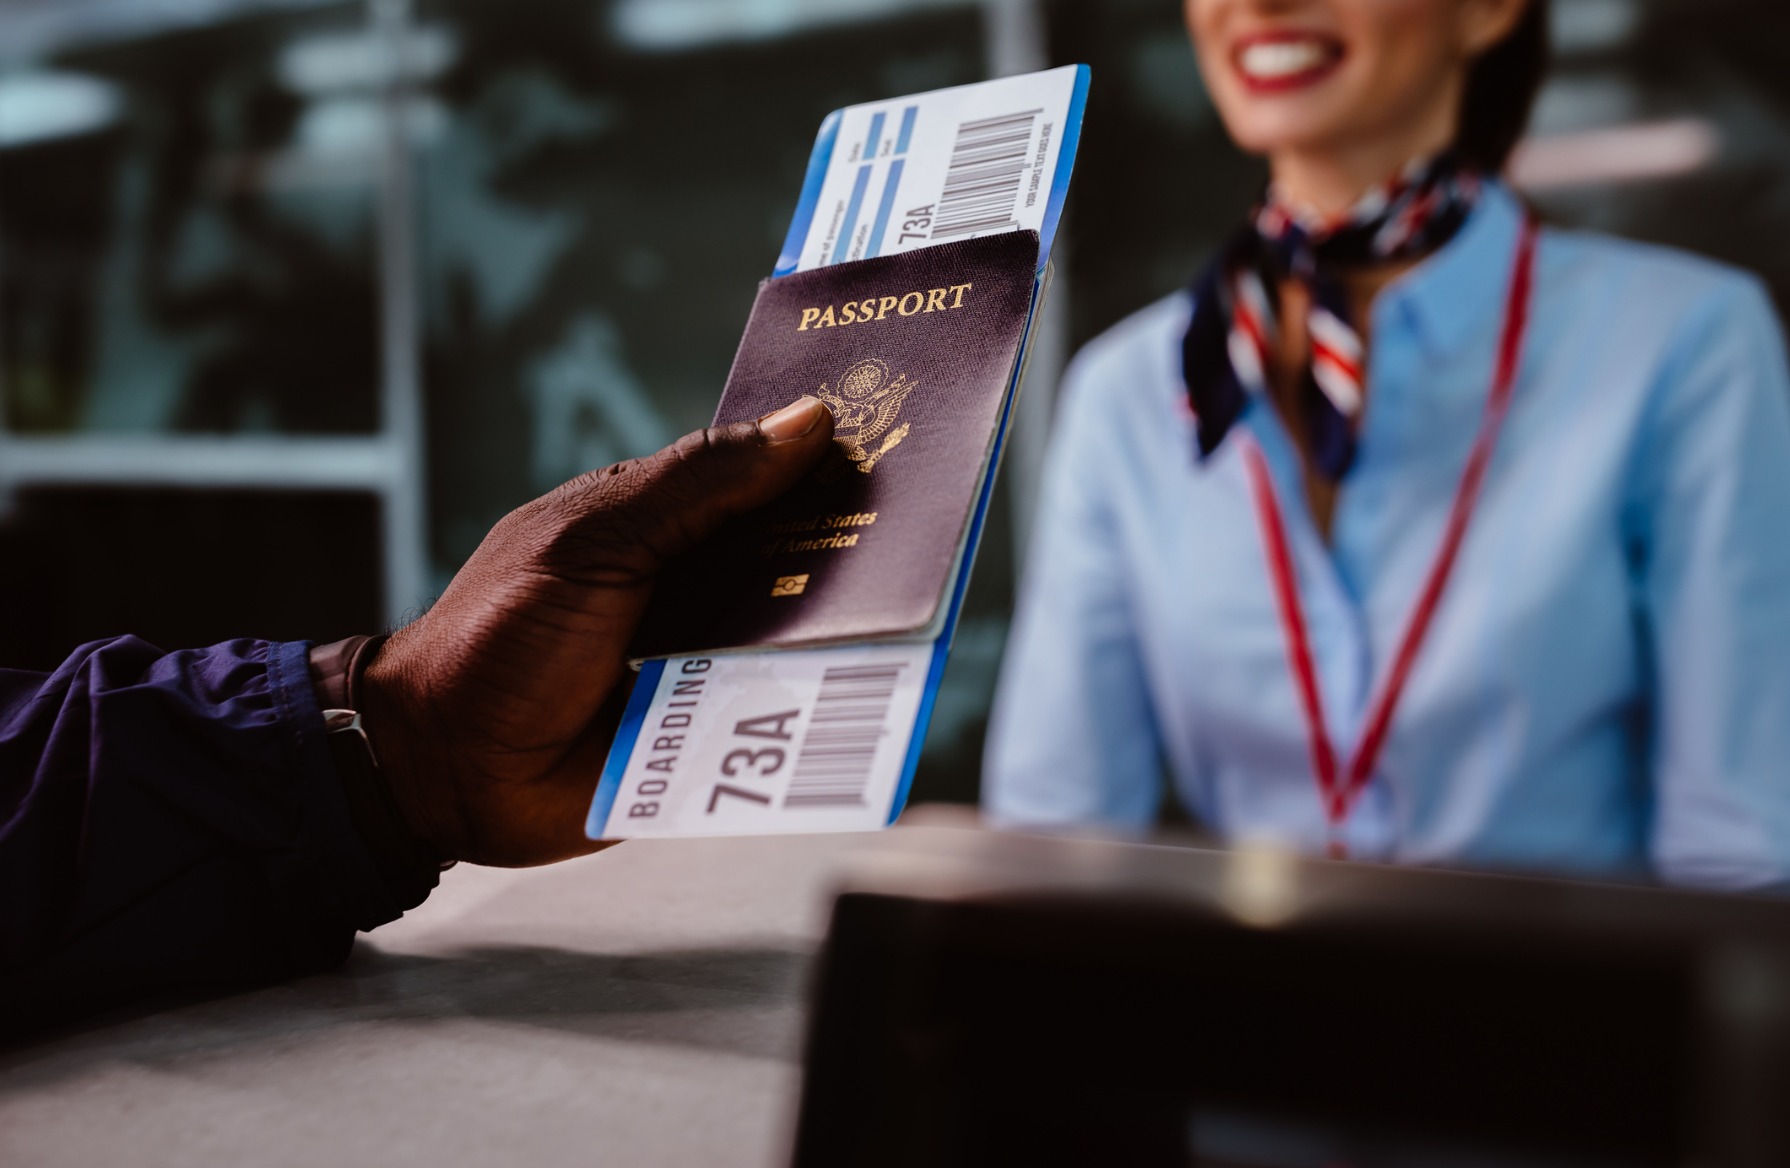 The Best Day to Buy Airline Tickets - The Active Times